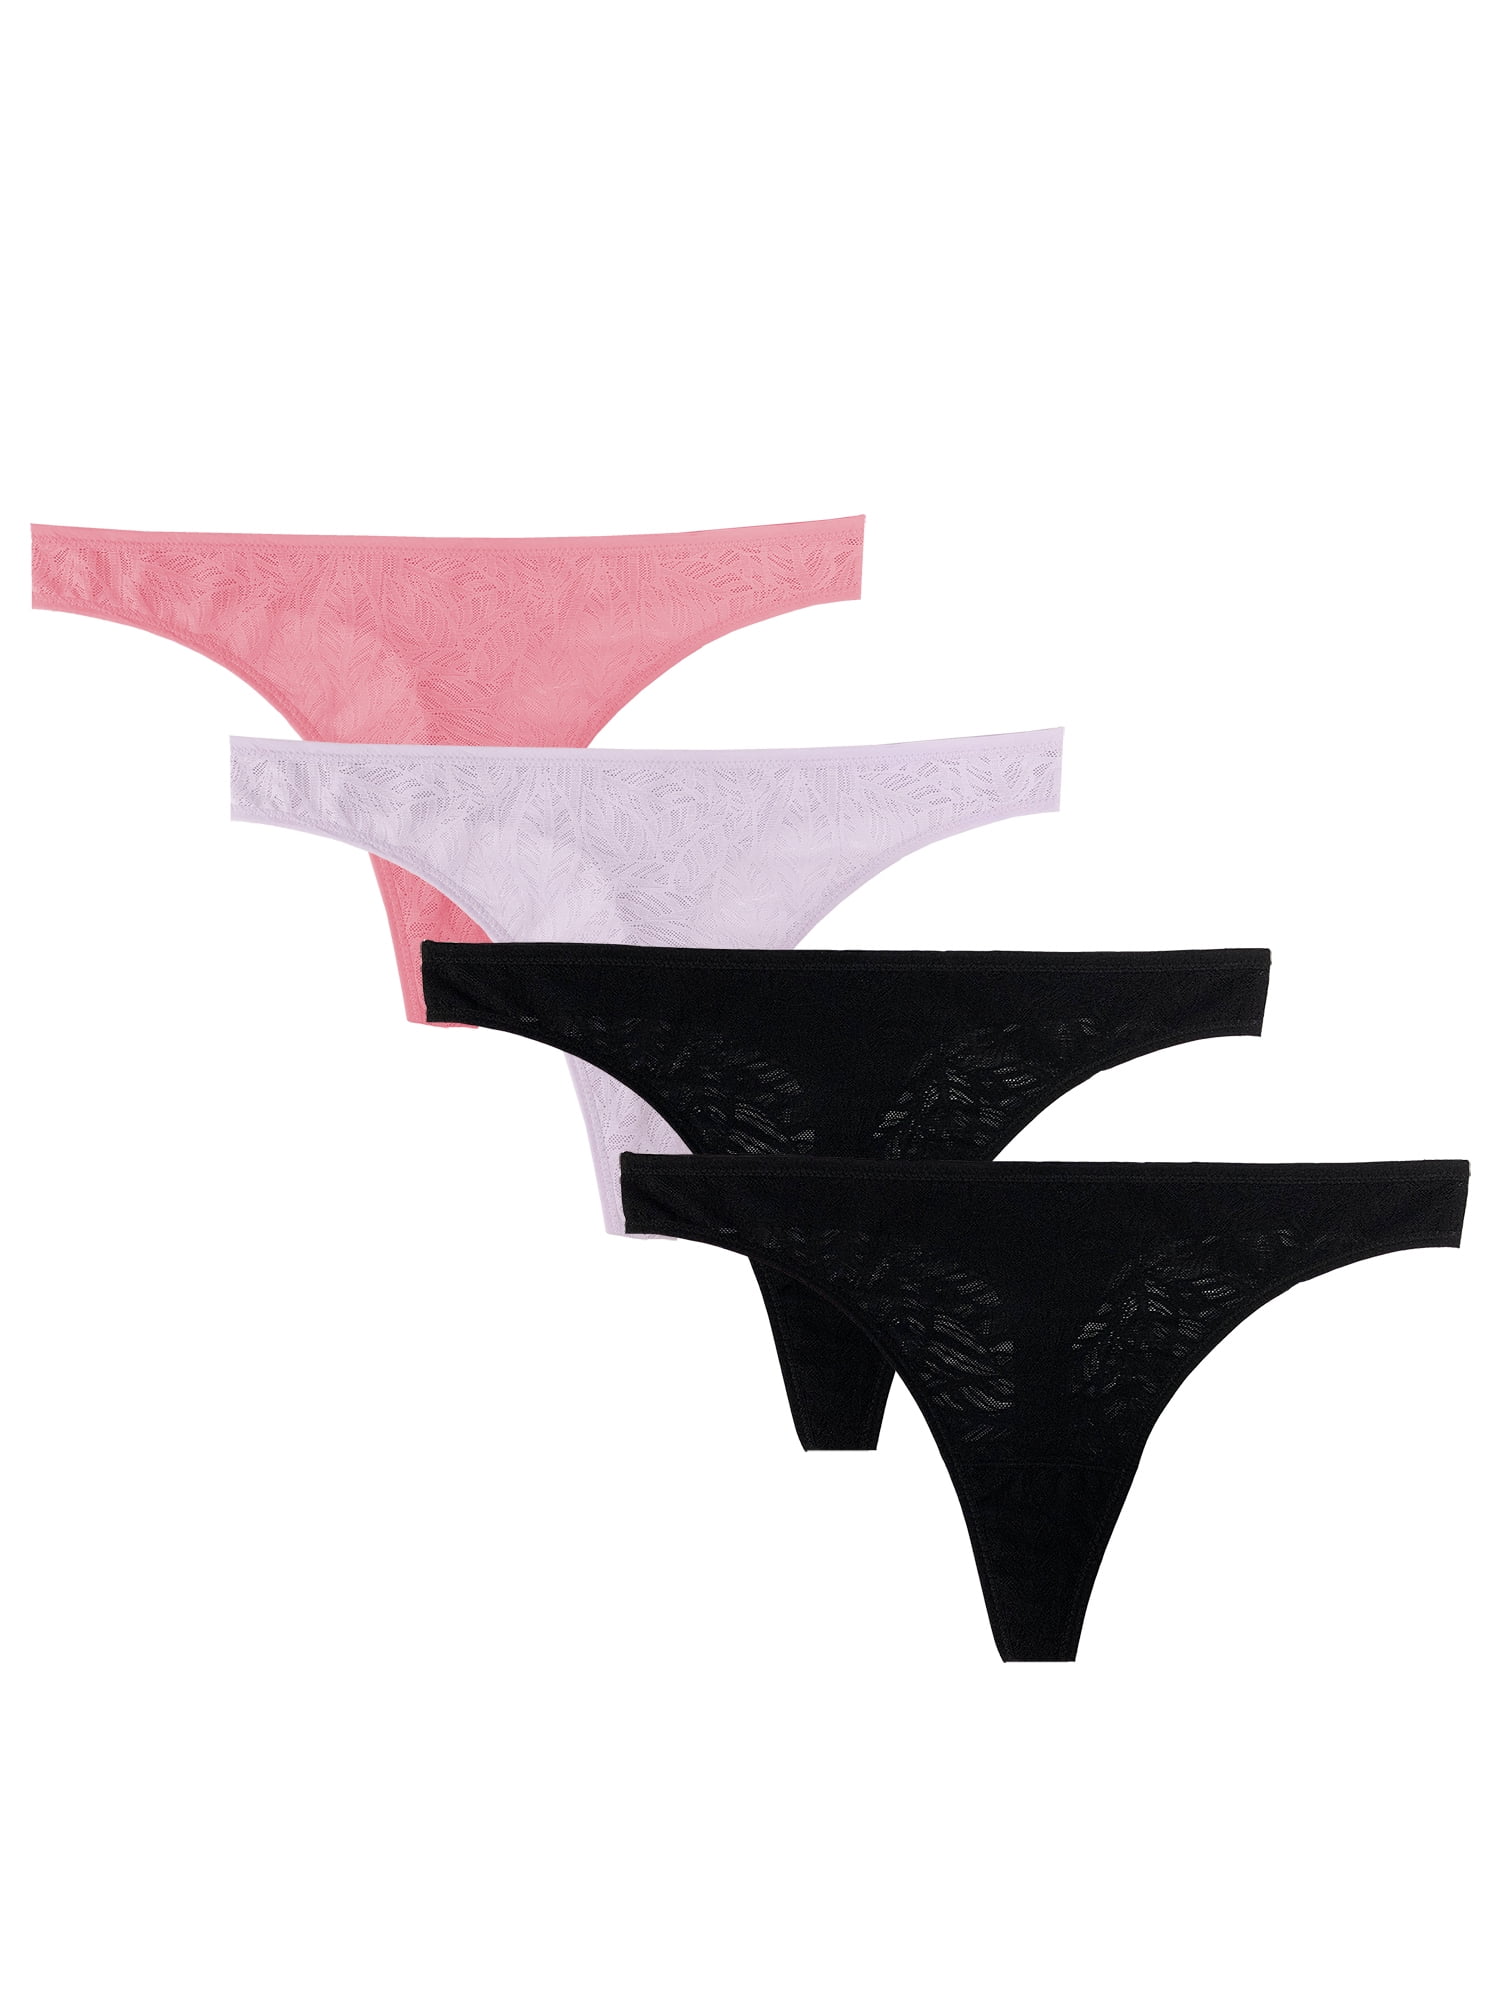 Navy Aqua Pink NEW 10 Details about   Secret Treasures AllOver Lace Thong Panties 3Pack 3XL/3XG